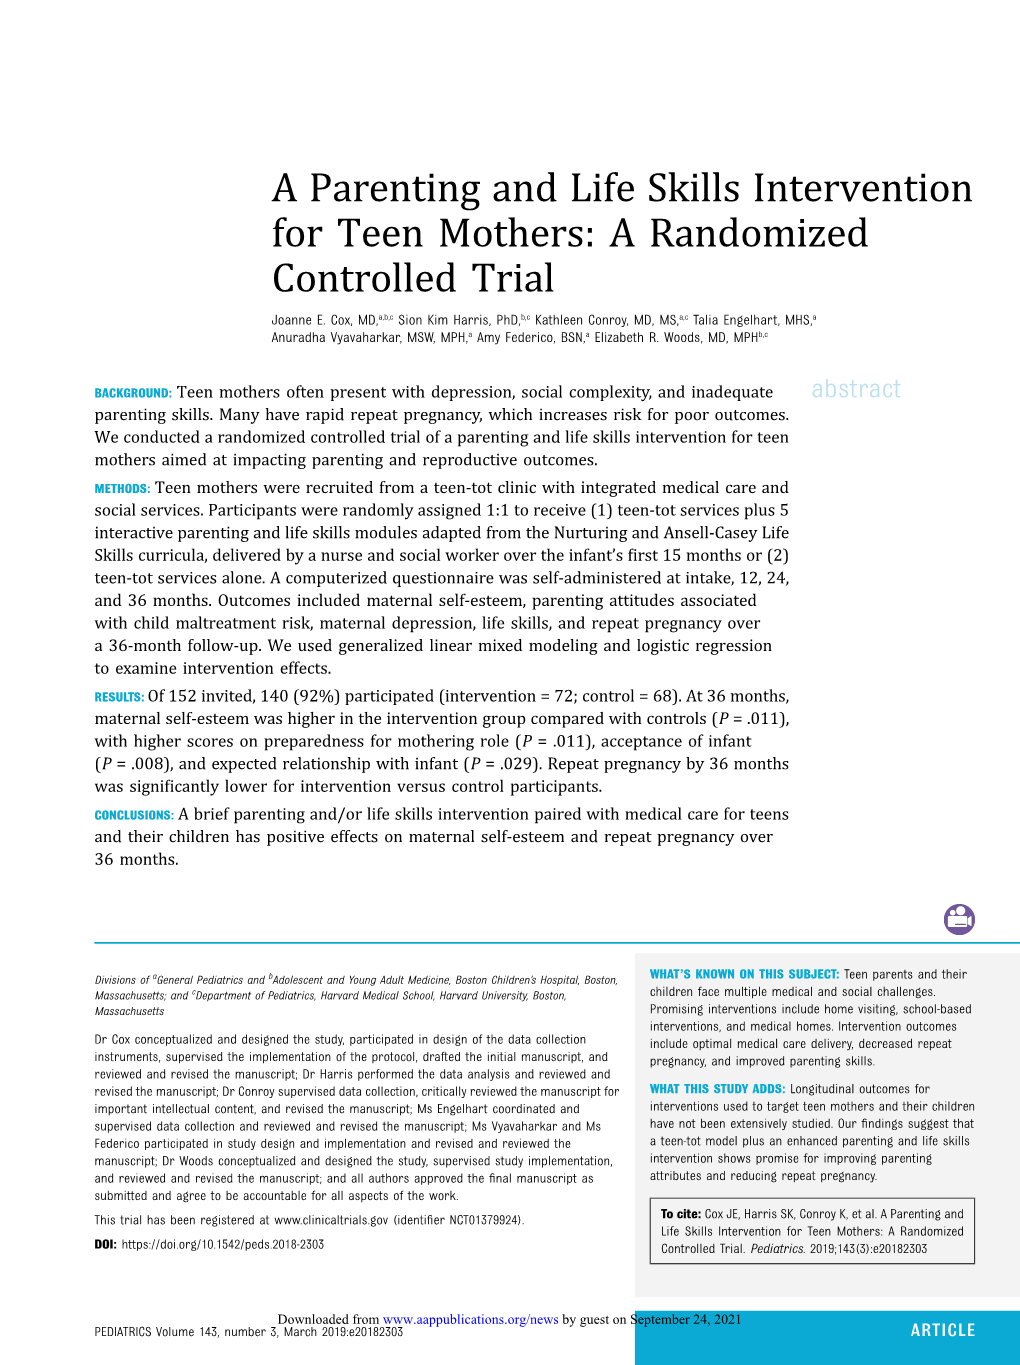 A Parenting and Life Skills Intervention for Teen Mothers: a Randomized Controlled Trial Joanne E